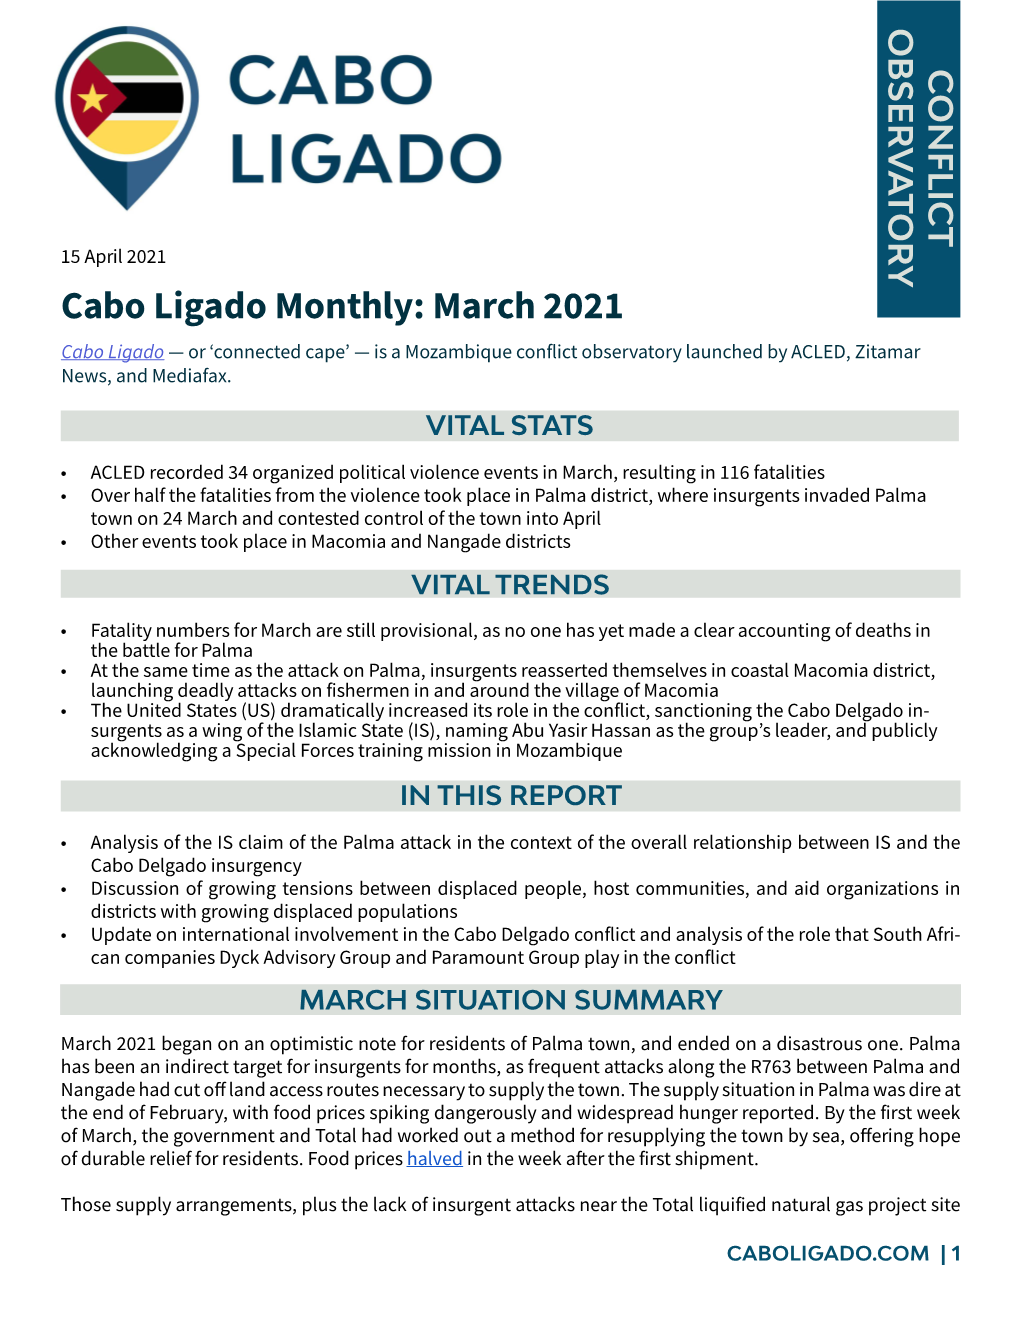 March 2021 March Monthly: Ligado Cabo 15 April 2021 15 April March March 2021 Began on an Optimistic Note for Residents of Town, Palma and Ended on a One